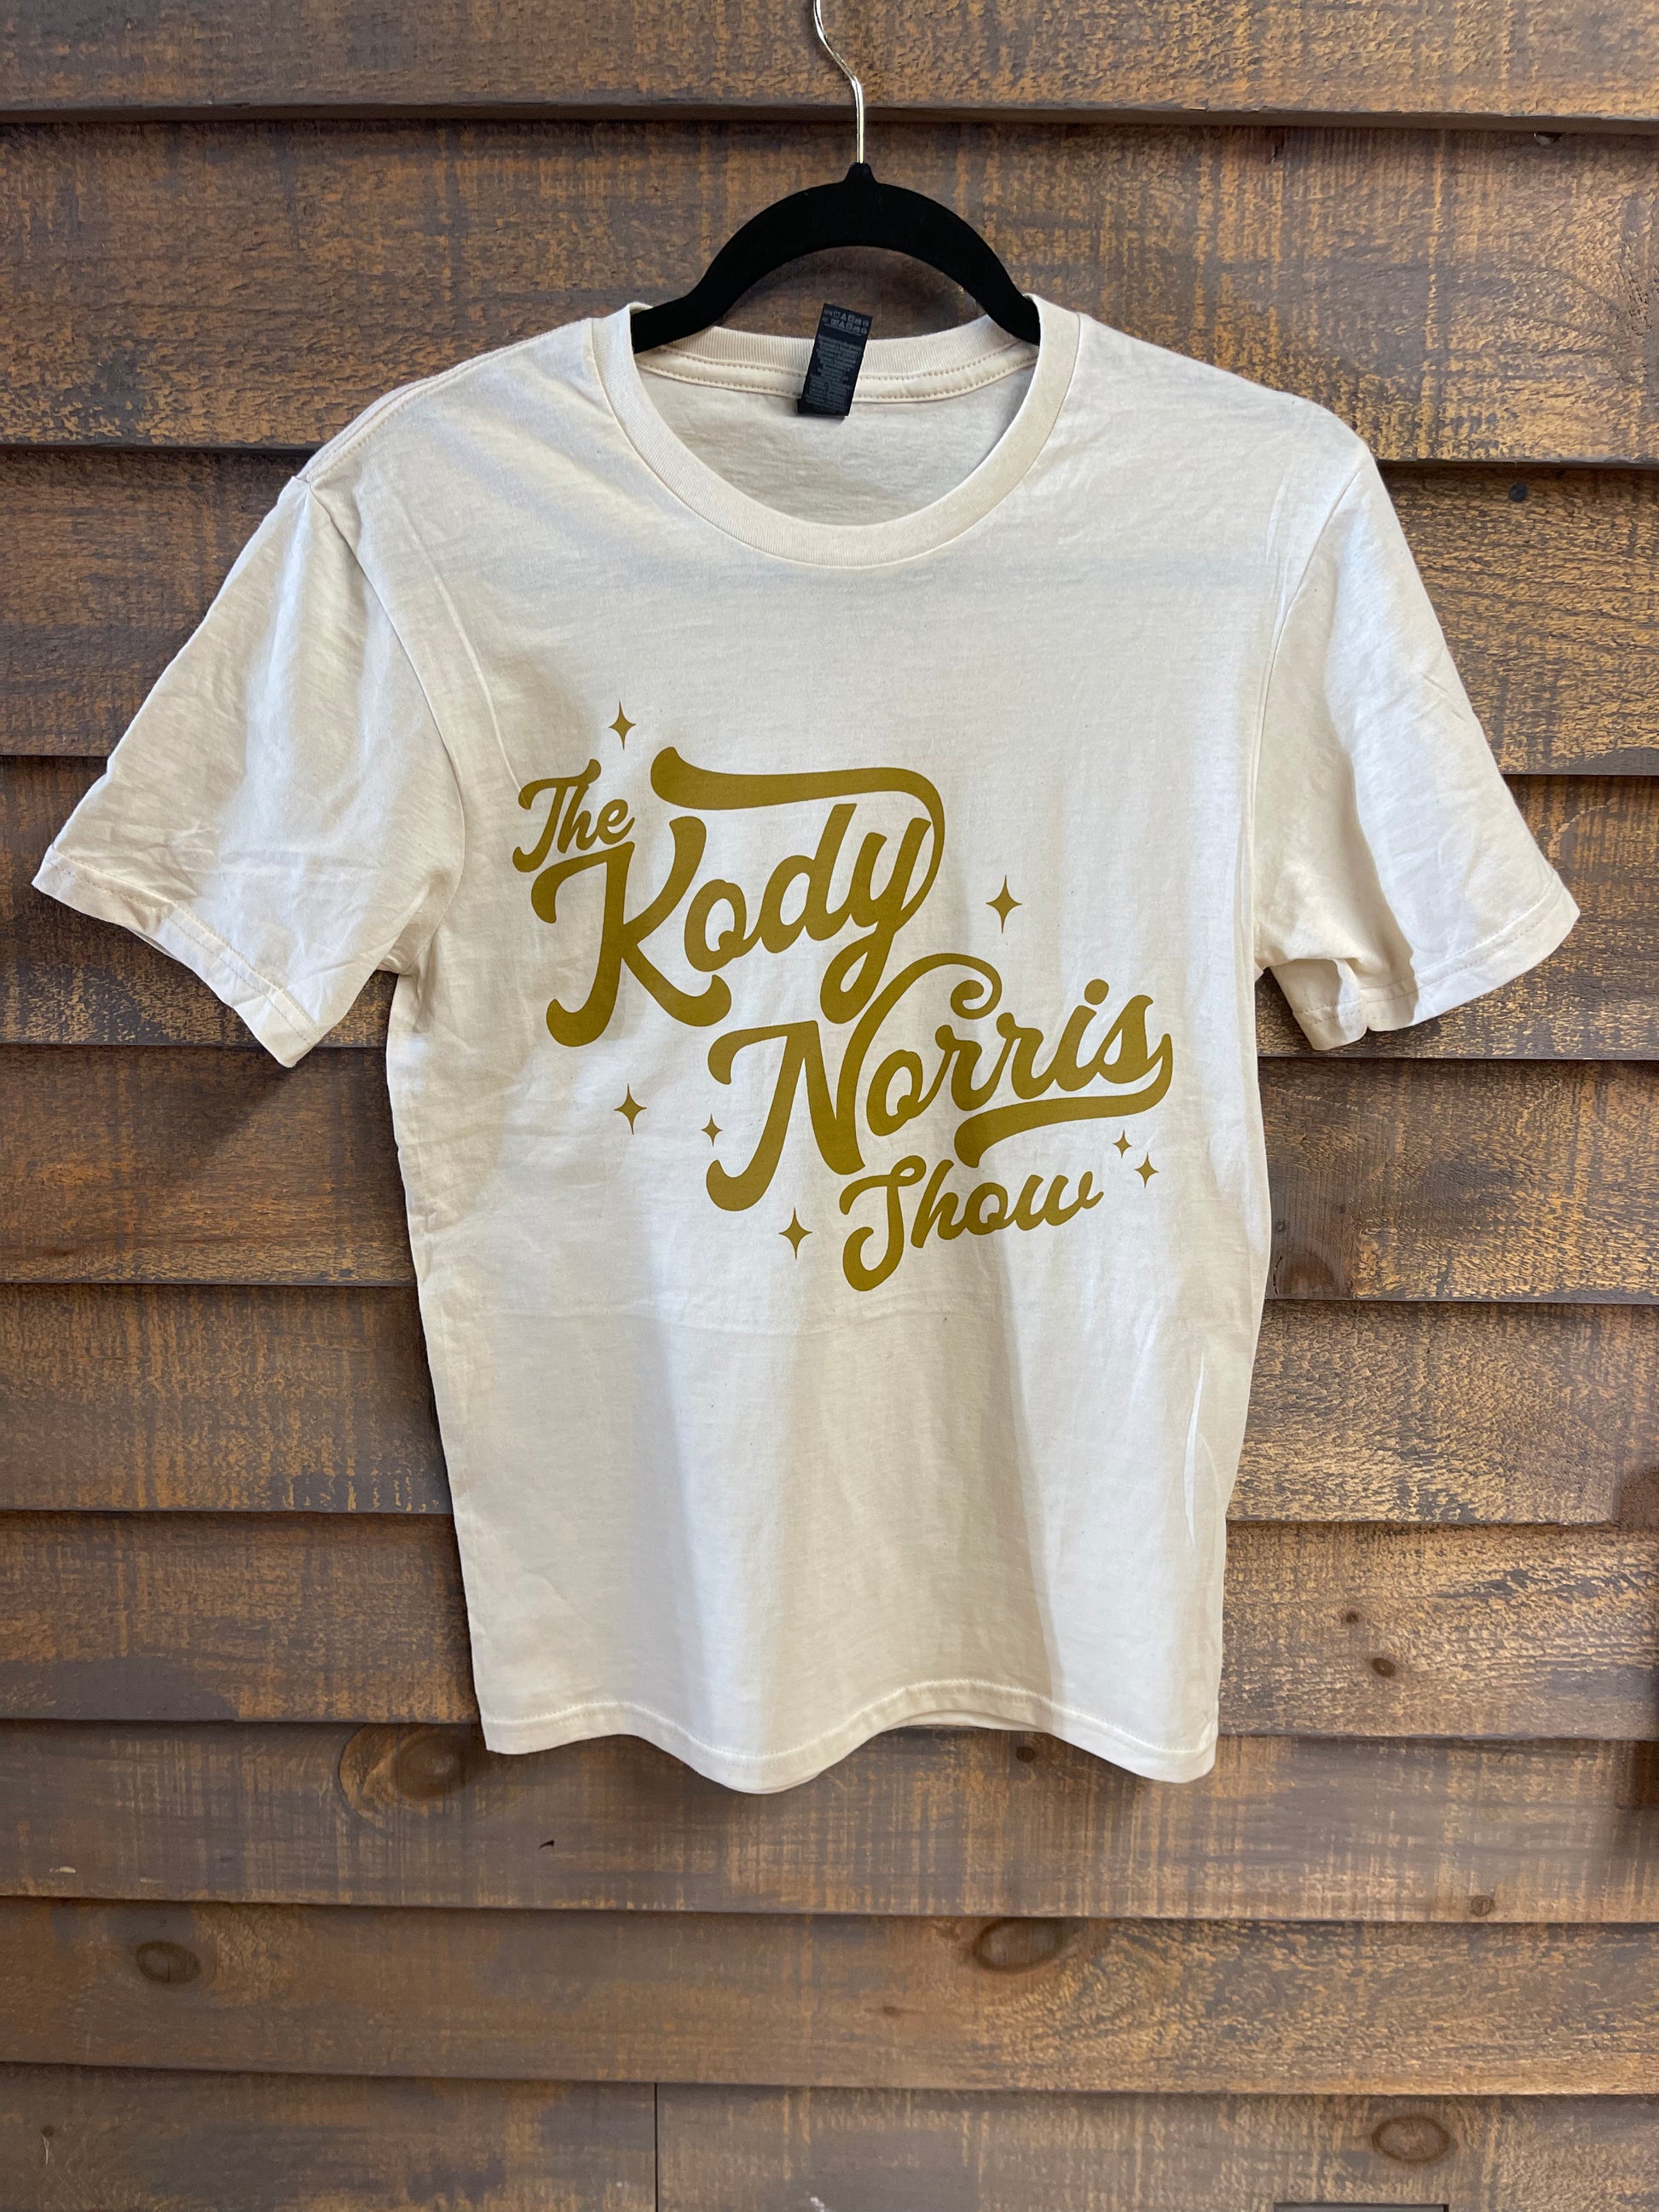 The Kody Norris Show Graphic Tee (Short Sleeve, Color Natural) Gildan Softstyle Tee. Available in Natural with Gold Lettering All Shirts include a secondary logo on the back collar.